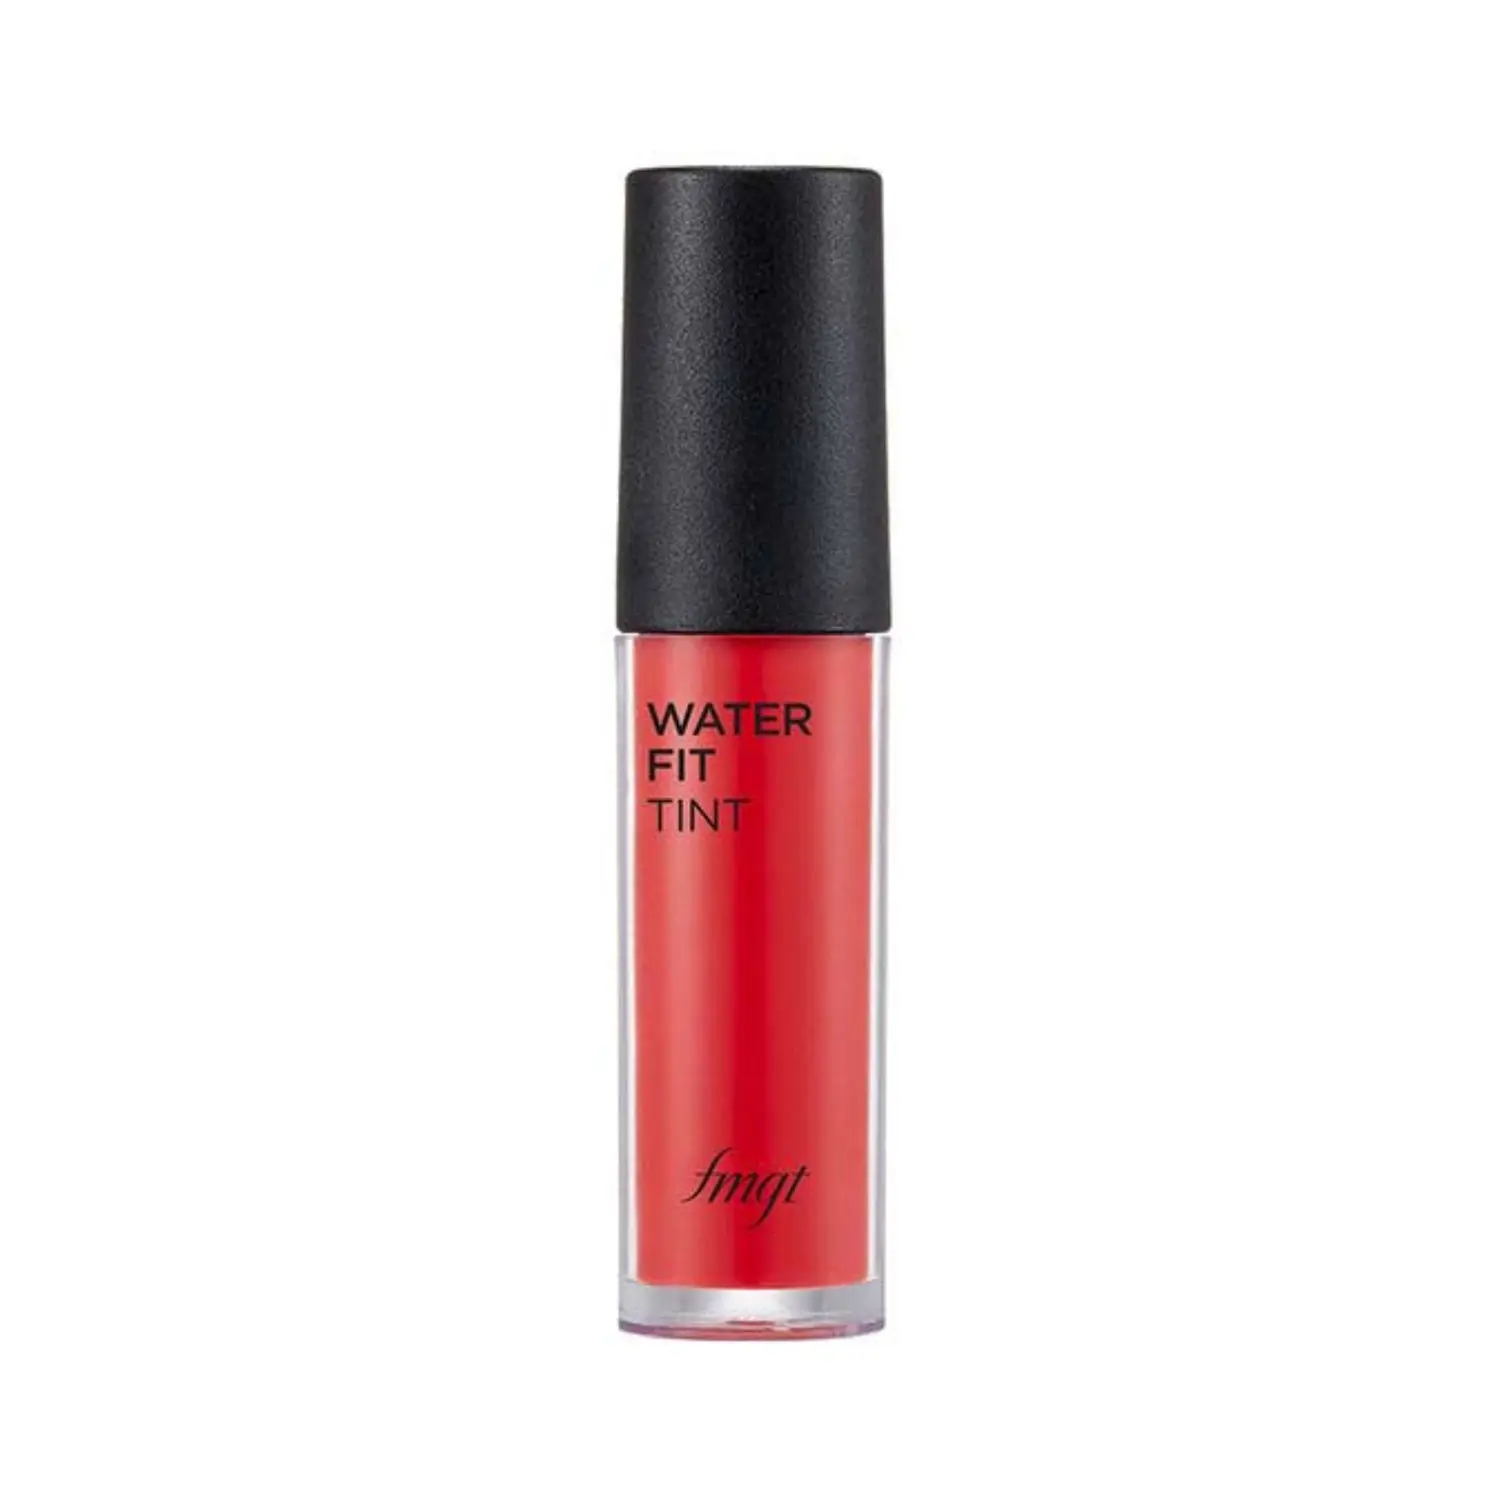 The Face Shop | The Face Shop Water Fit Lip Tint - Pink Mate (5g)